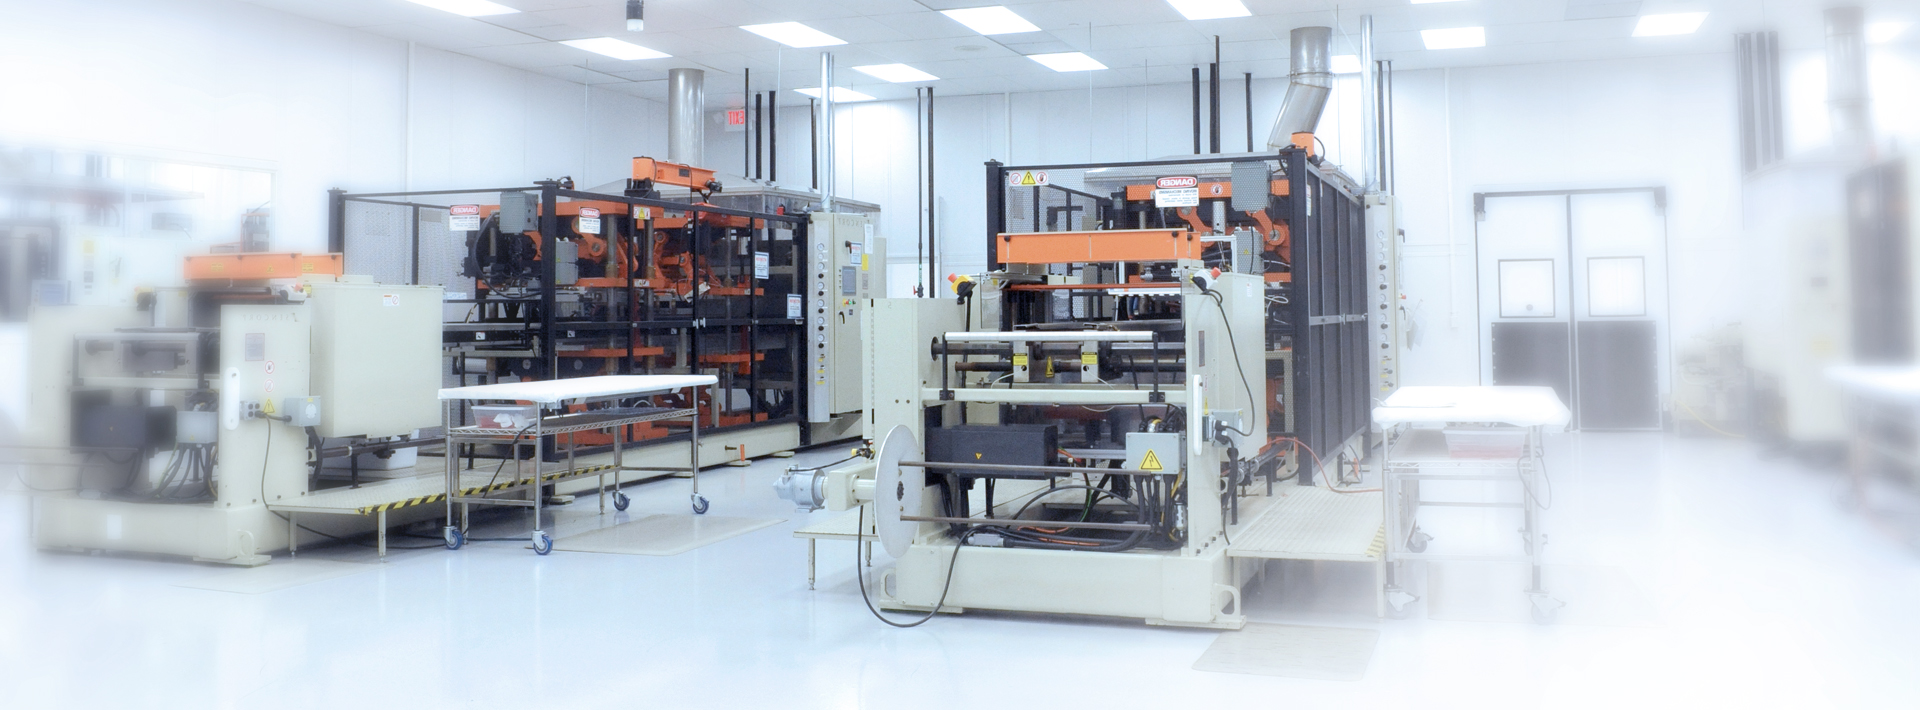 Thermoforming Machines in Clean Room